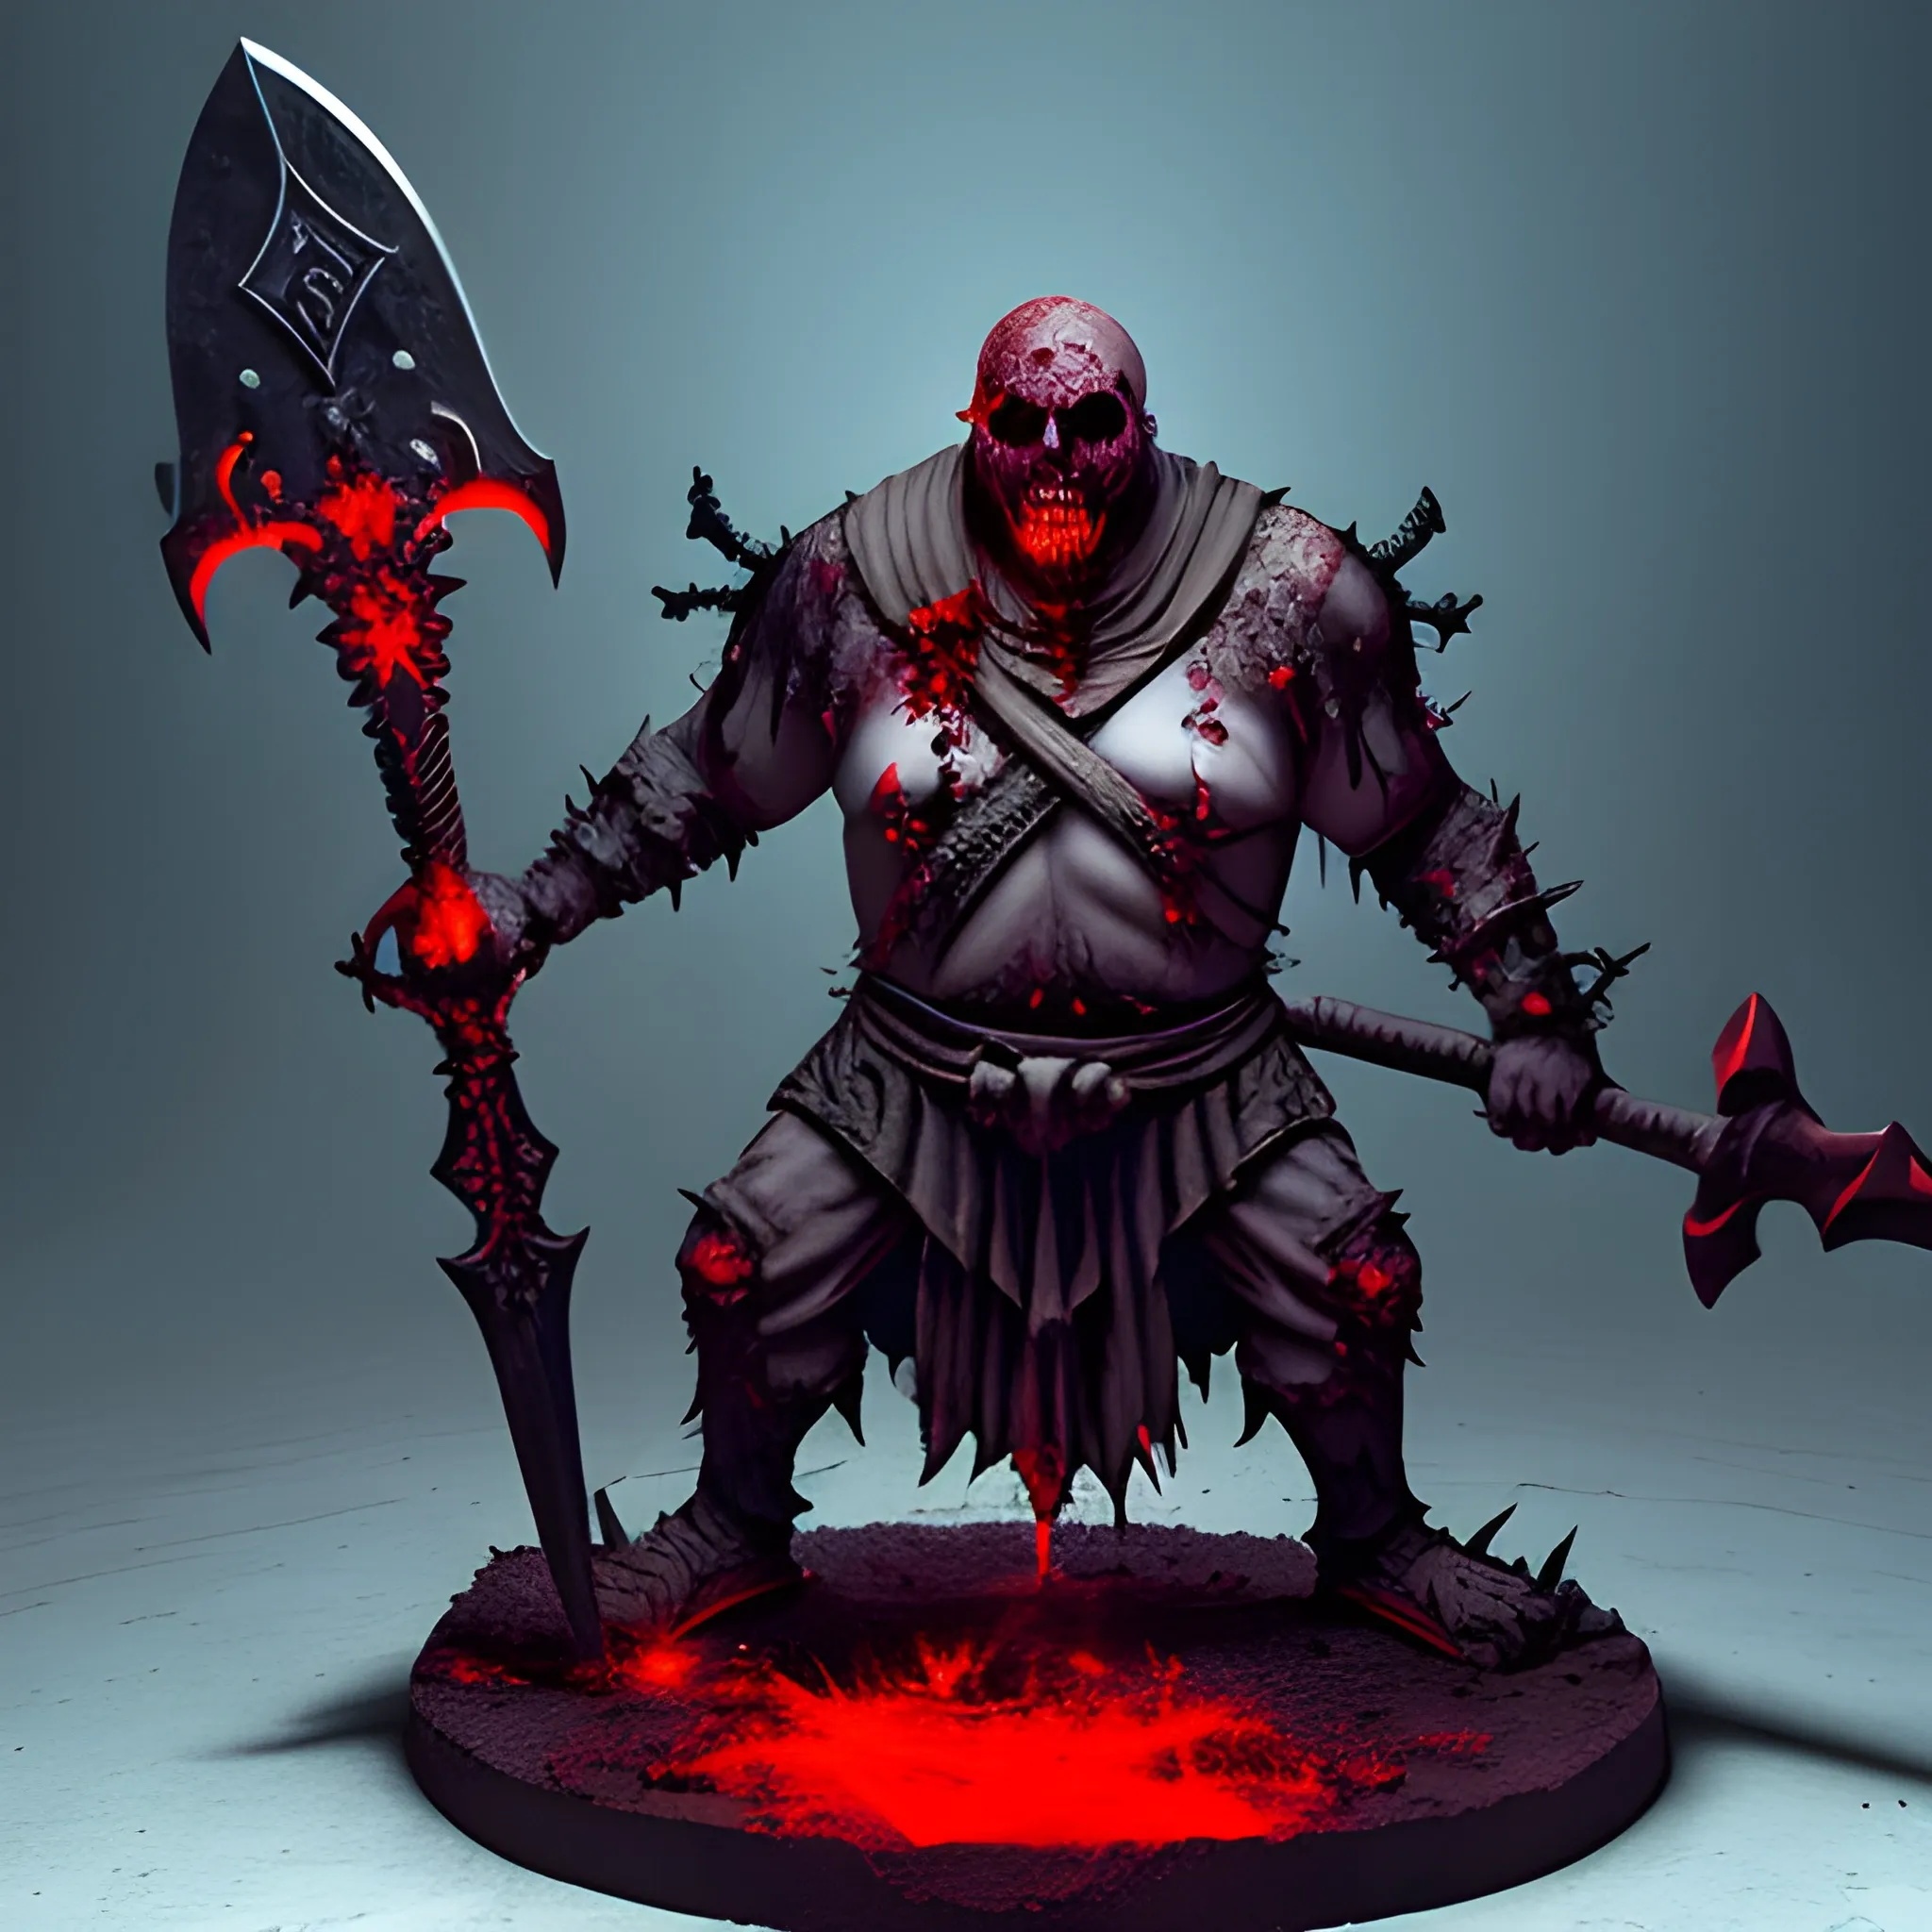 Huge Undead Man, Carrying Massive Axe, Sword Impaled On The Top Of His Head, Wearing Steel Shoulder guards, His Heart Is A Furnace, Glowing Red Eyes